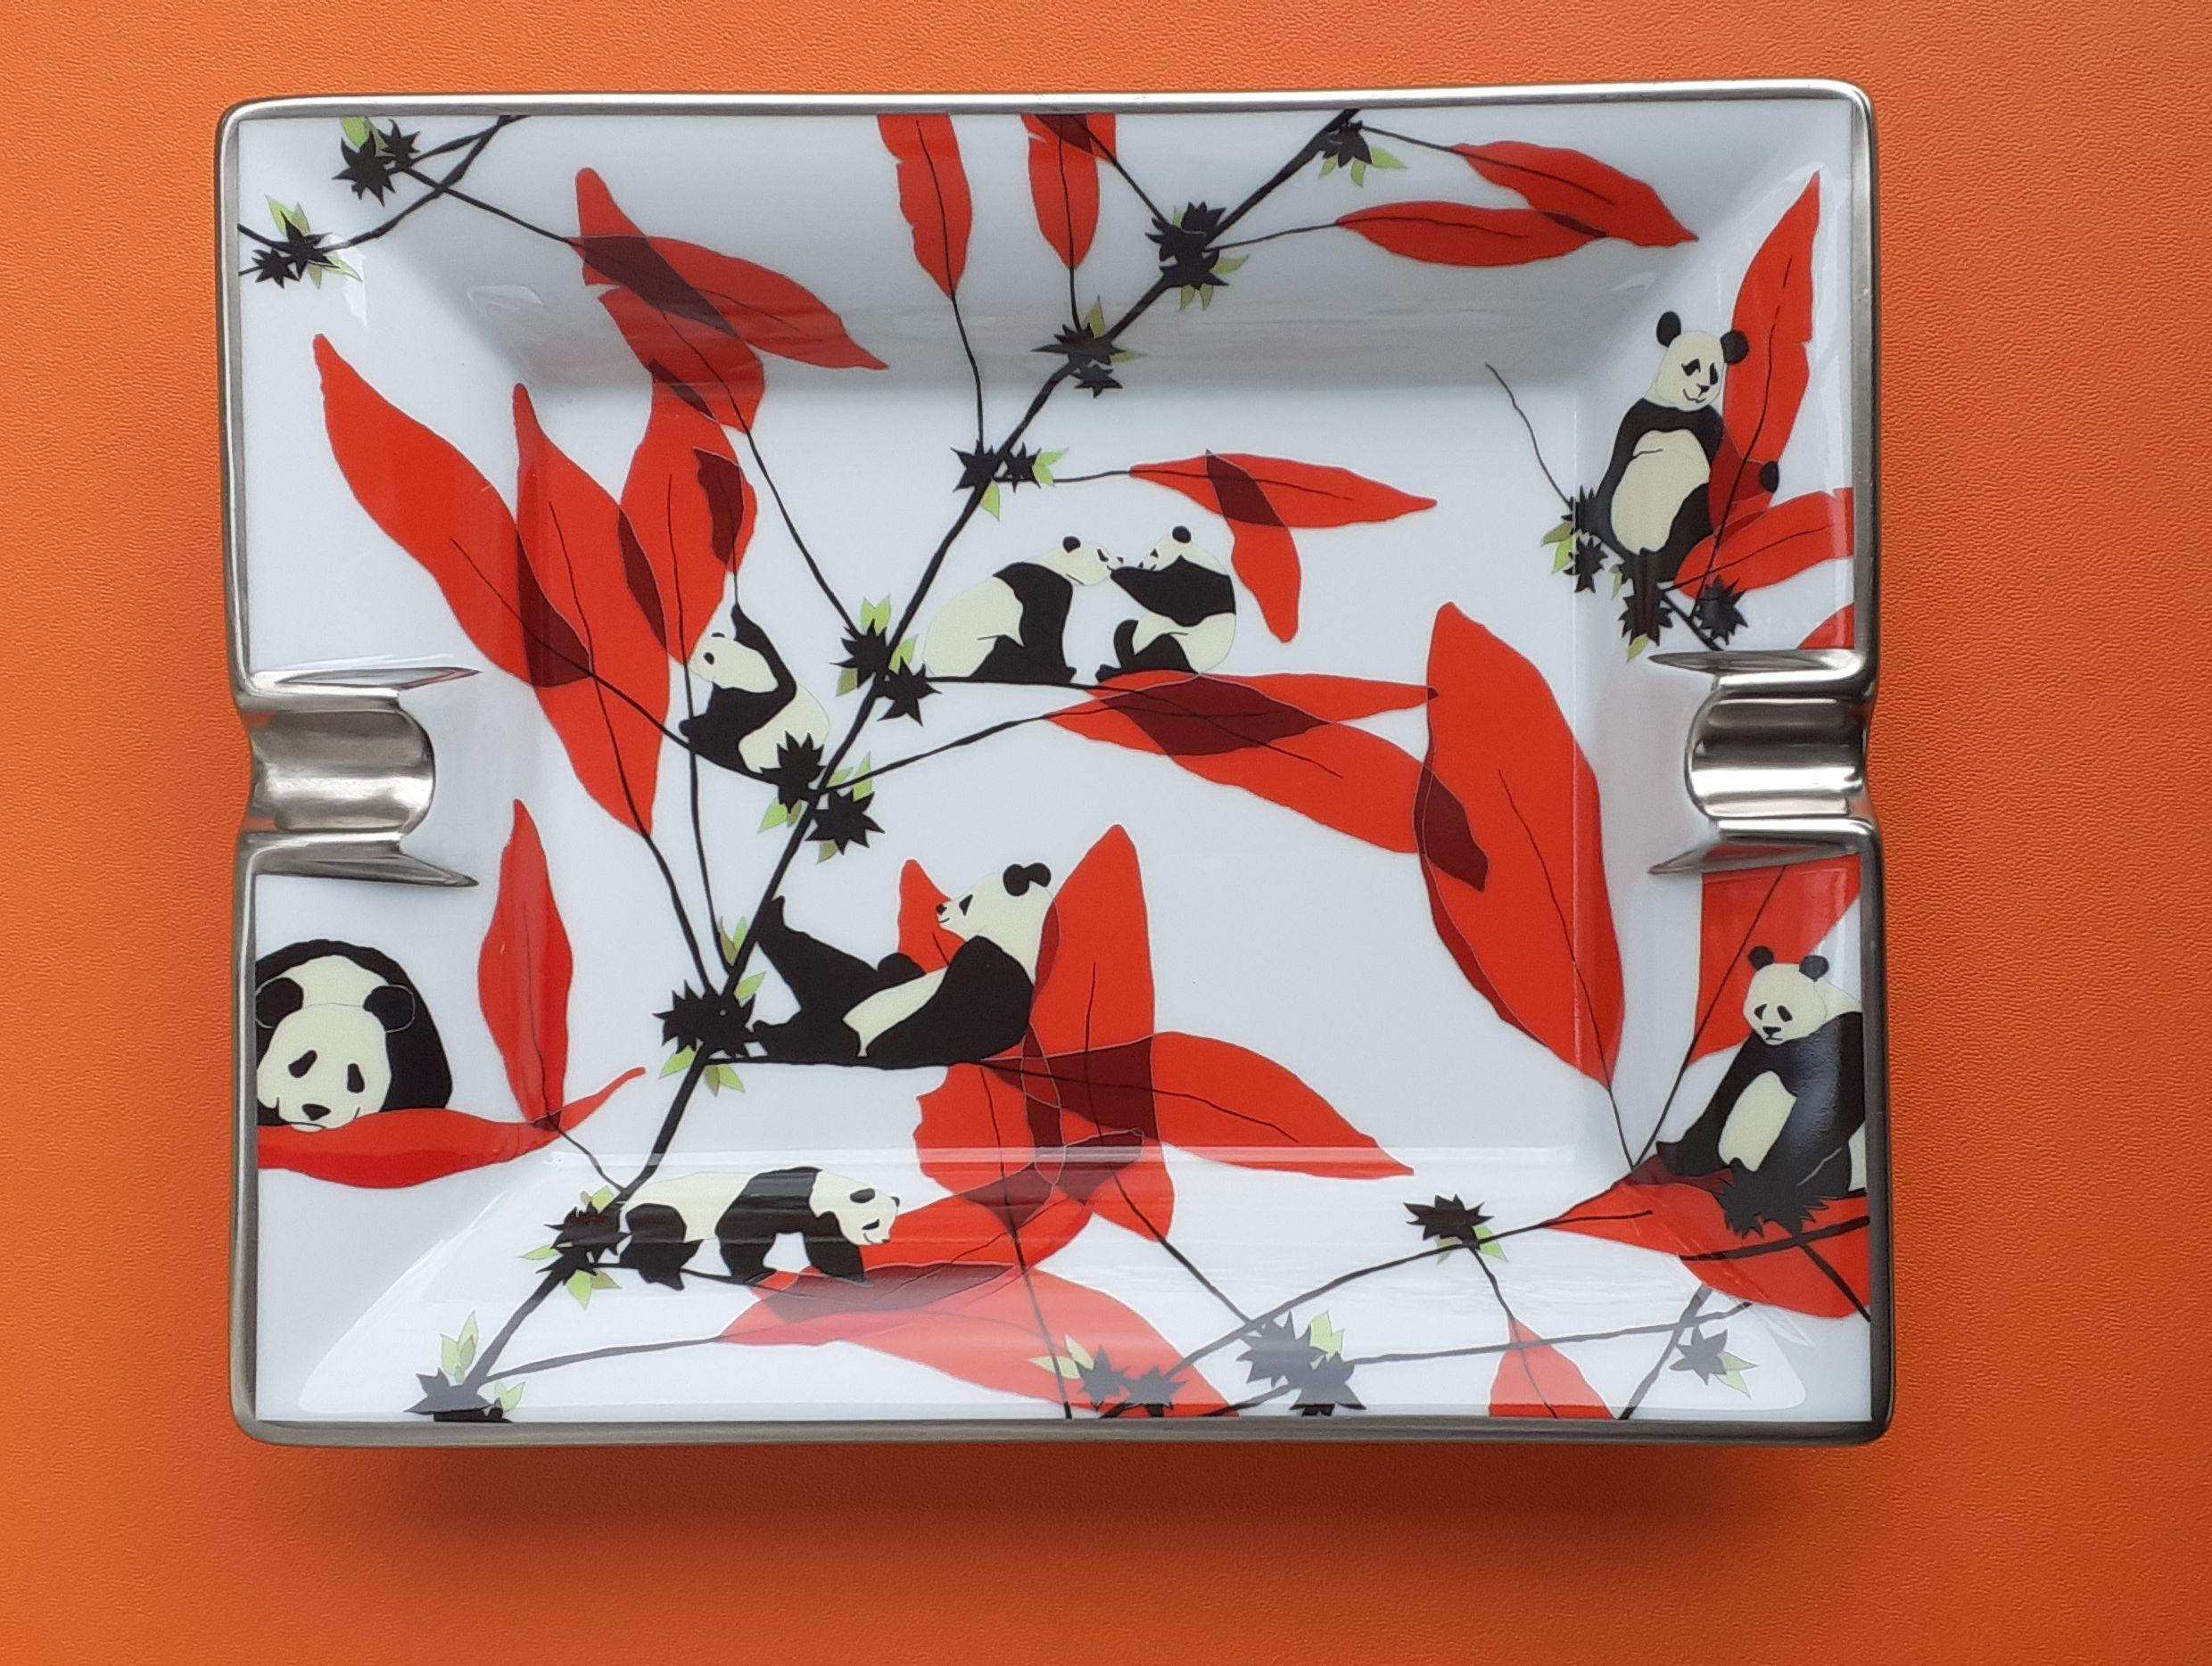 Super Cute Authentic Hermès Ashtray

Pattern: 8 Pandas and Bamboos

Very Rare

Made in France

Made of Porcelain and silver-tone edges

Colorways: White Background, Ivory and Black Pandas, Red and Green Bamboos

Suede Leather at bottom, with 